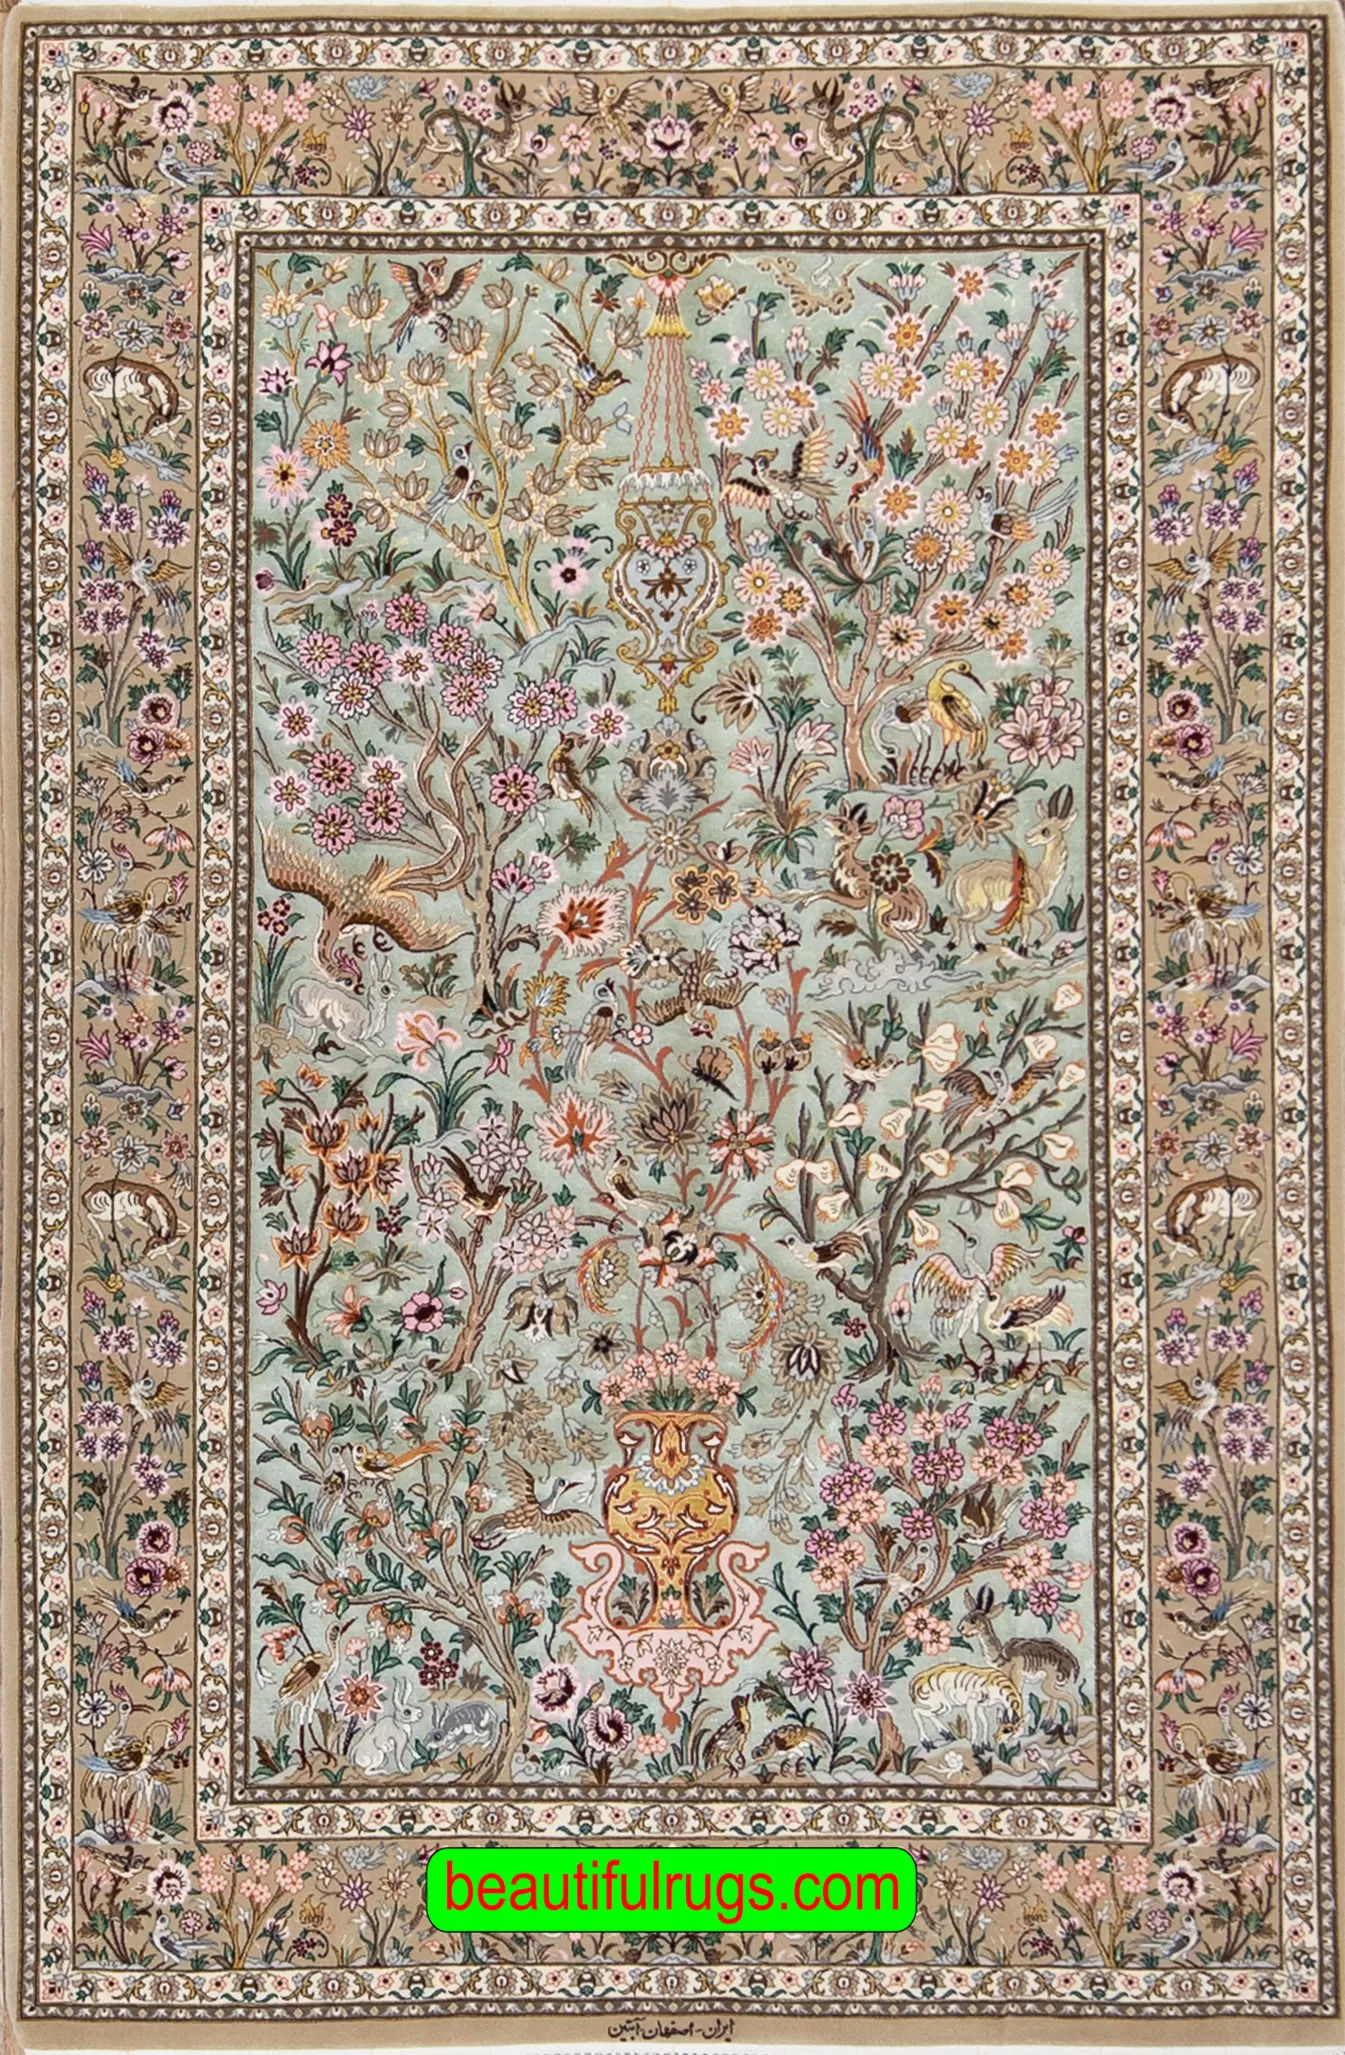 Green color Persian Isfahan kork wool and silk rugs with birds and flowers. Size 4.x7